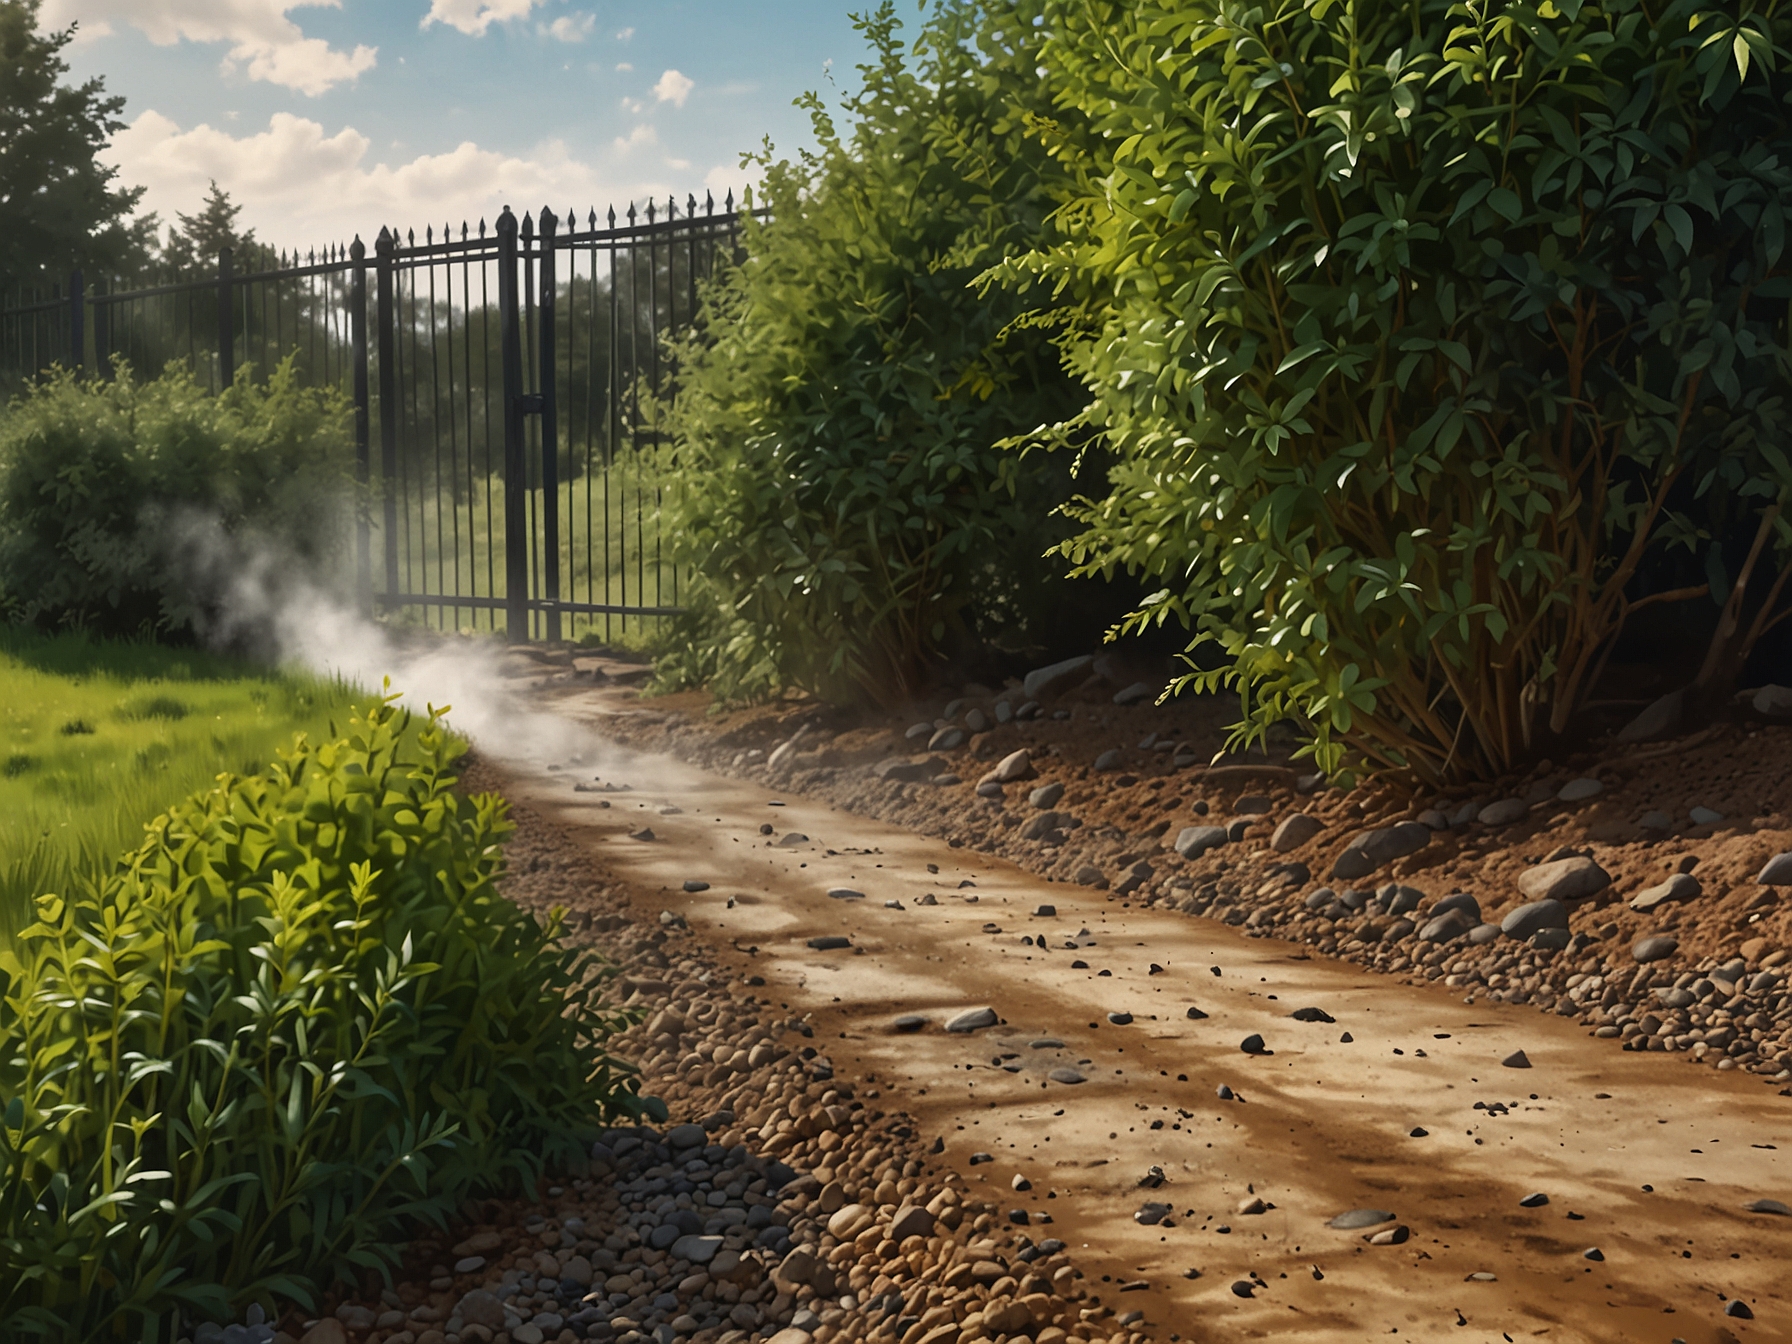 An image showing the application of boiling water on a gravel pathway to kill weeds, illustrating how this method effectively targets and eradicates unwanted plants.